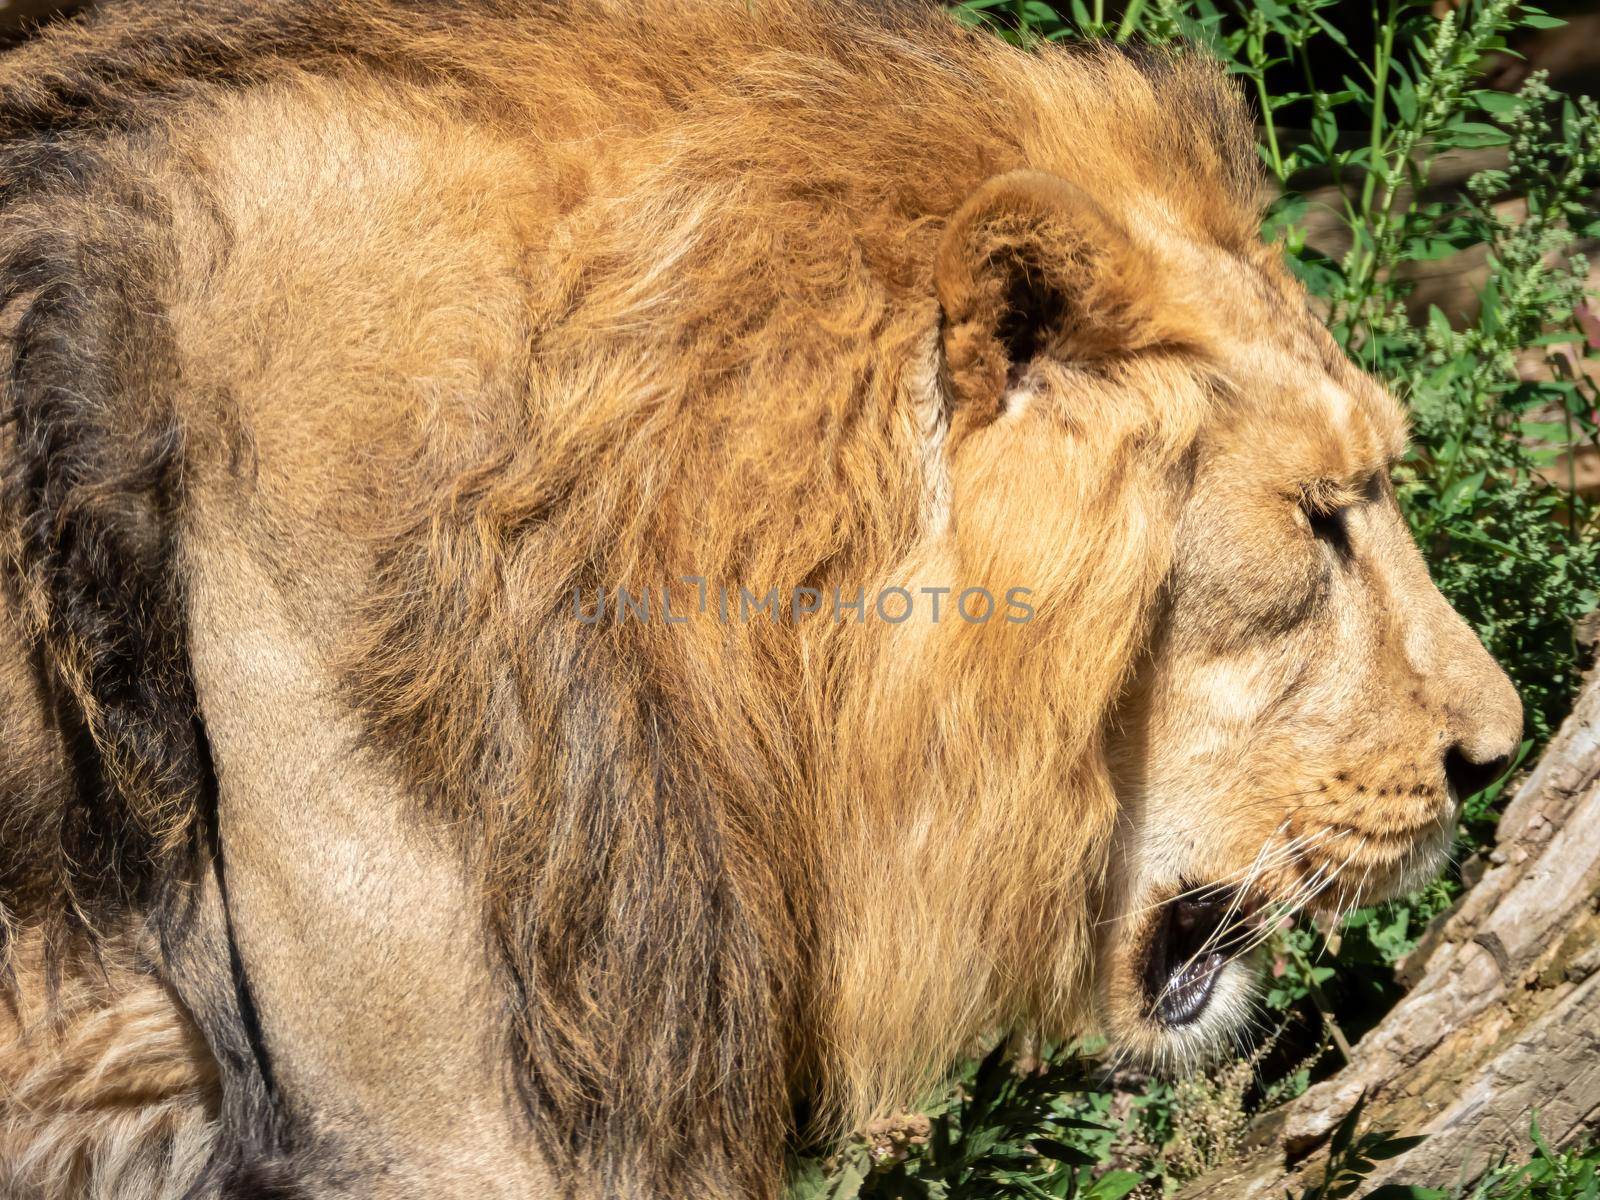 Adult male lion bypasses its territory on a sunny summer day, closeup view